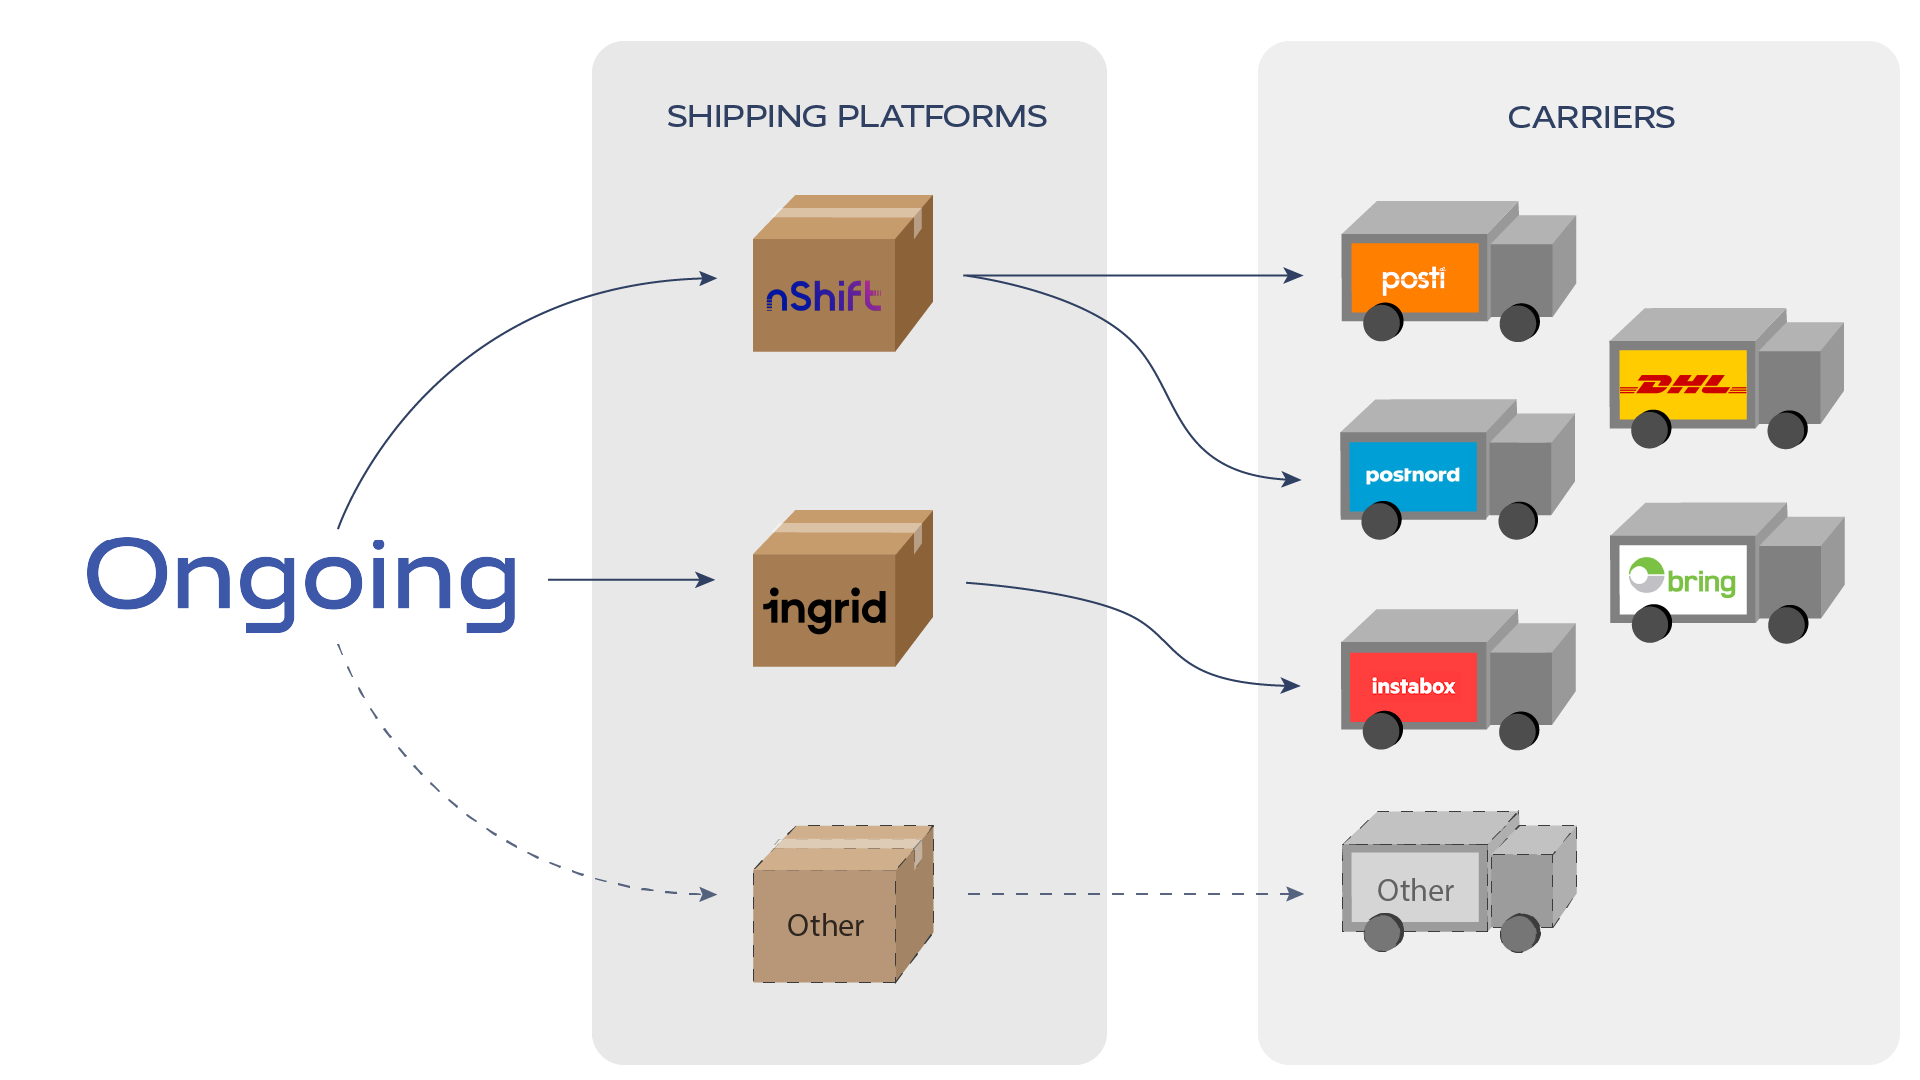 An illustration about how Ongoing WMS connects through carriers via shipping platforms.